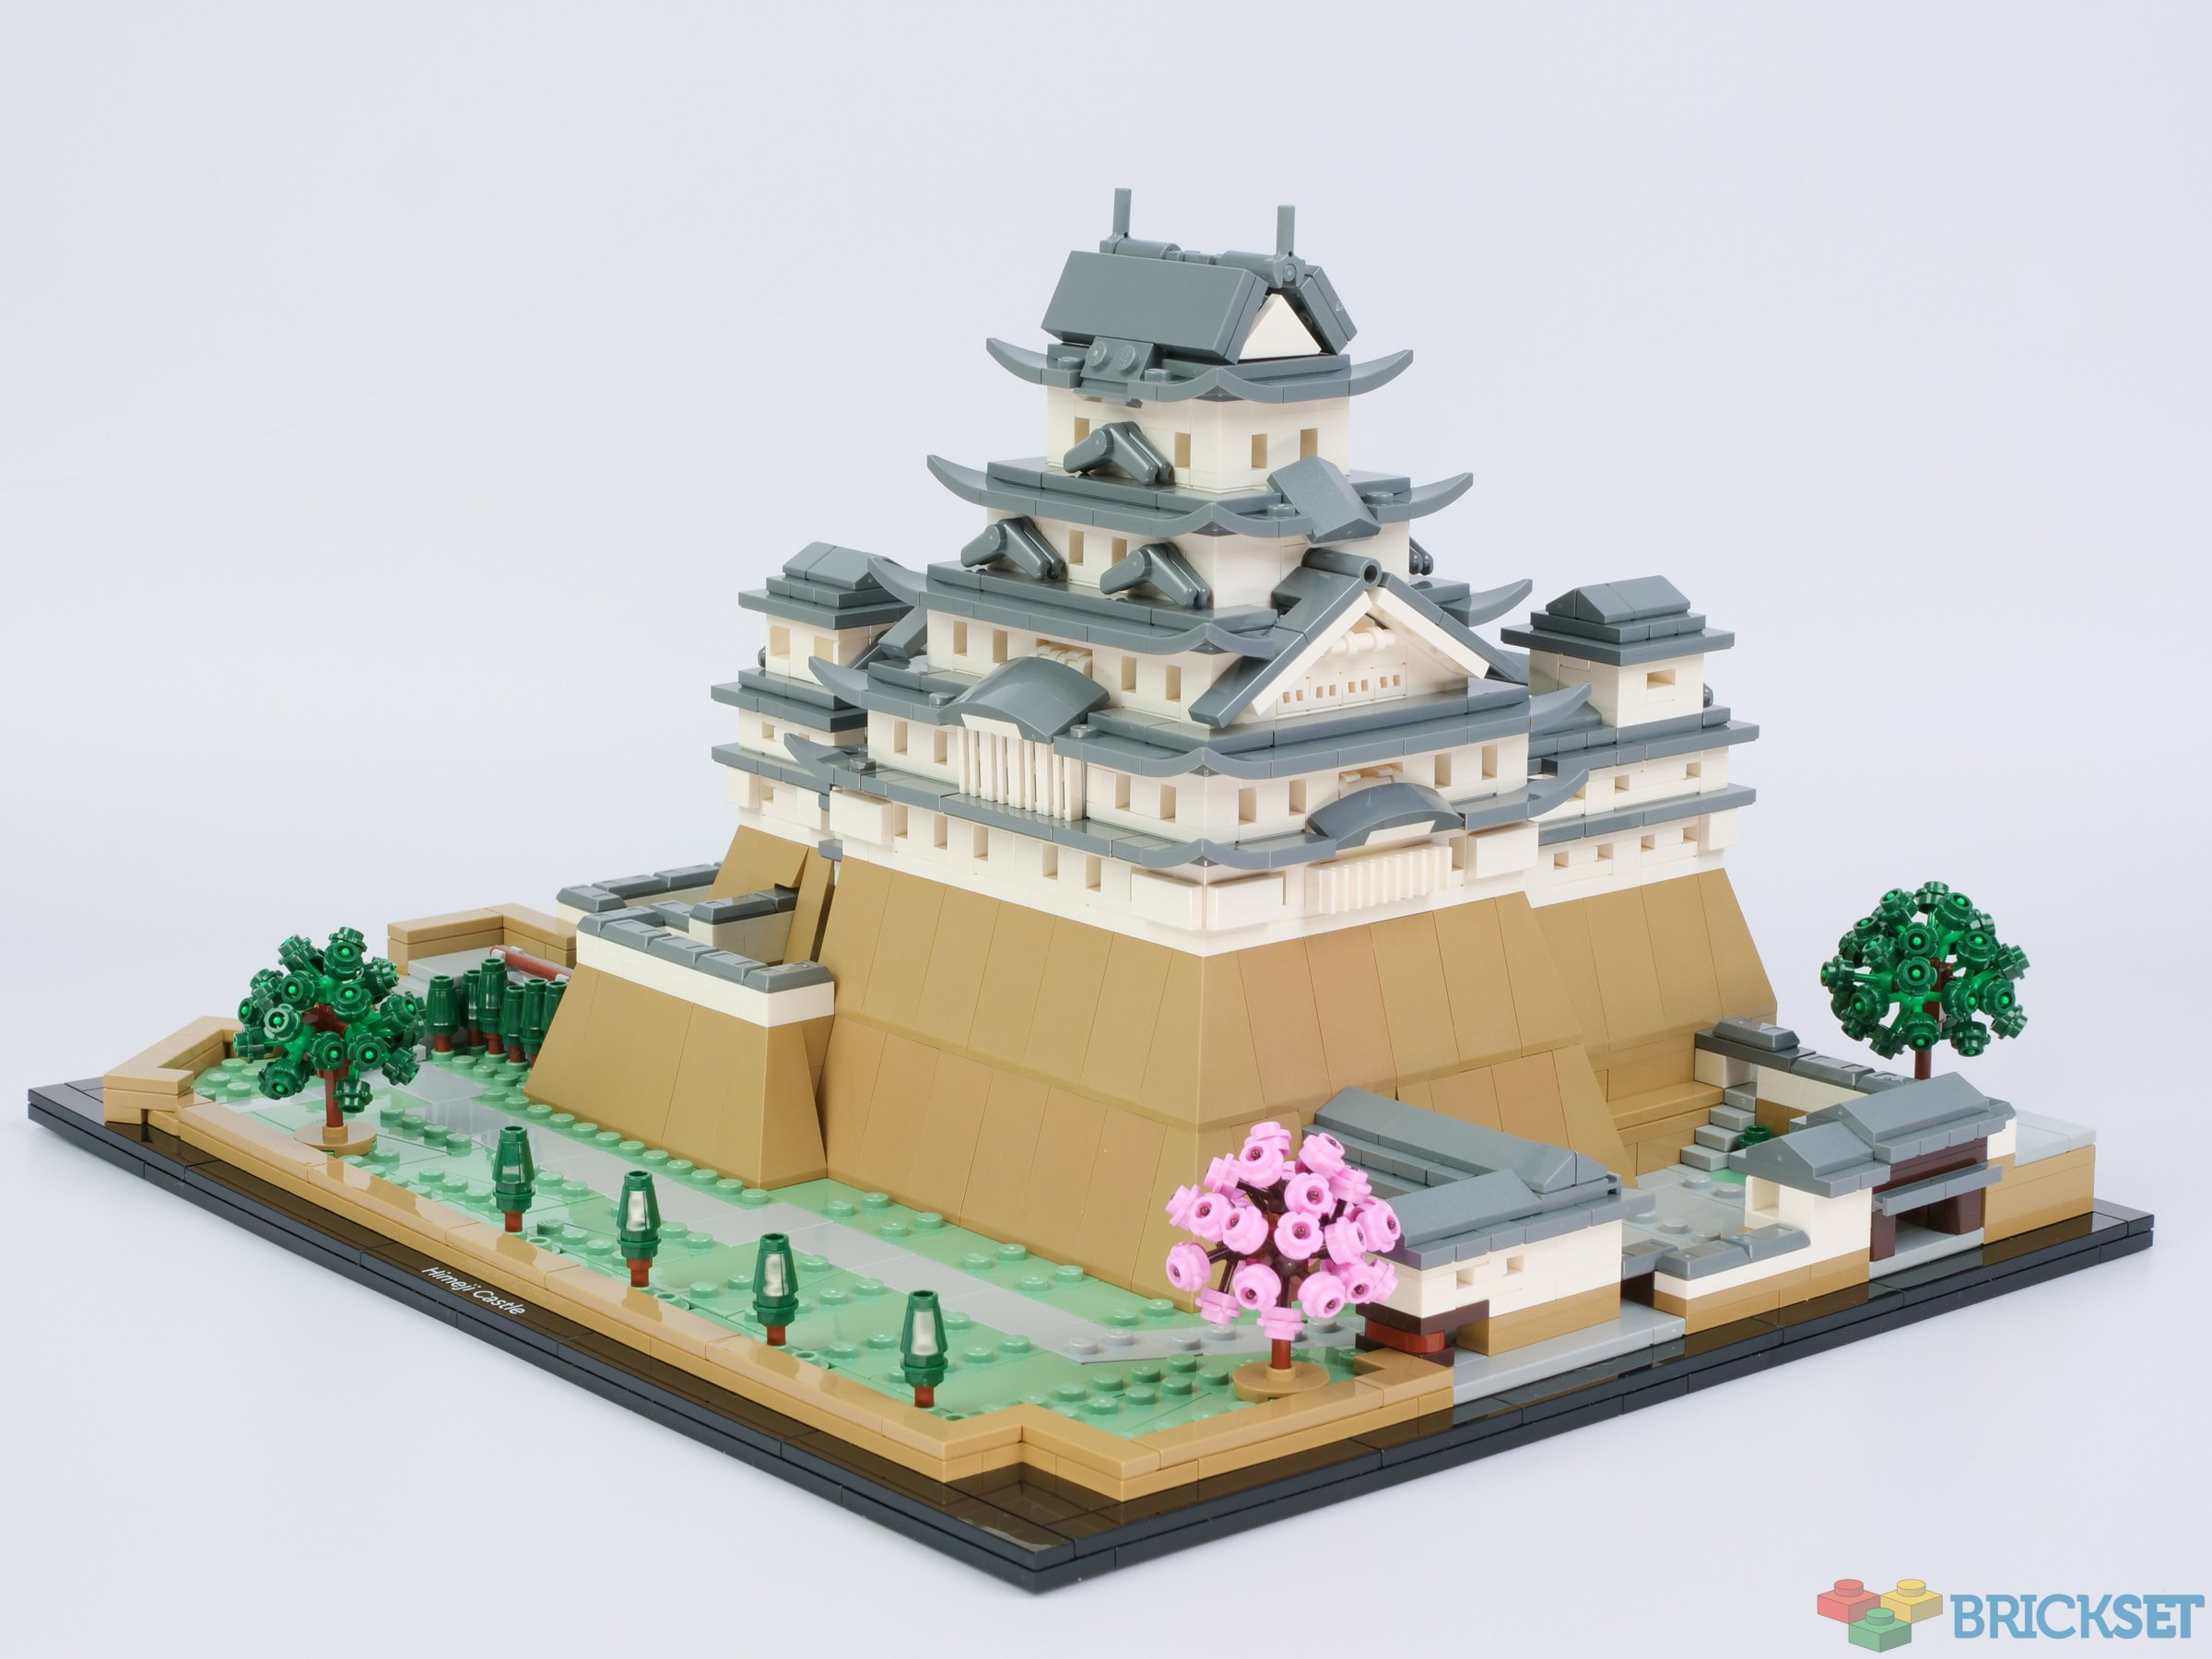 LEGO Architecture 21060 Himeji Castle [Review] - The Brothers Brick